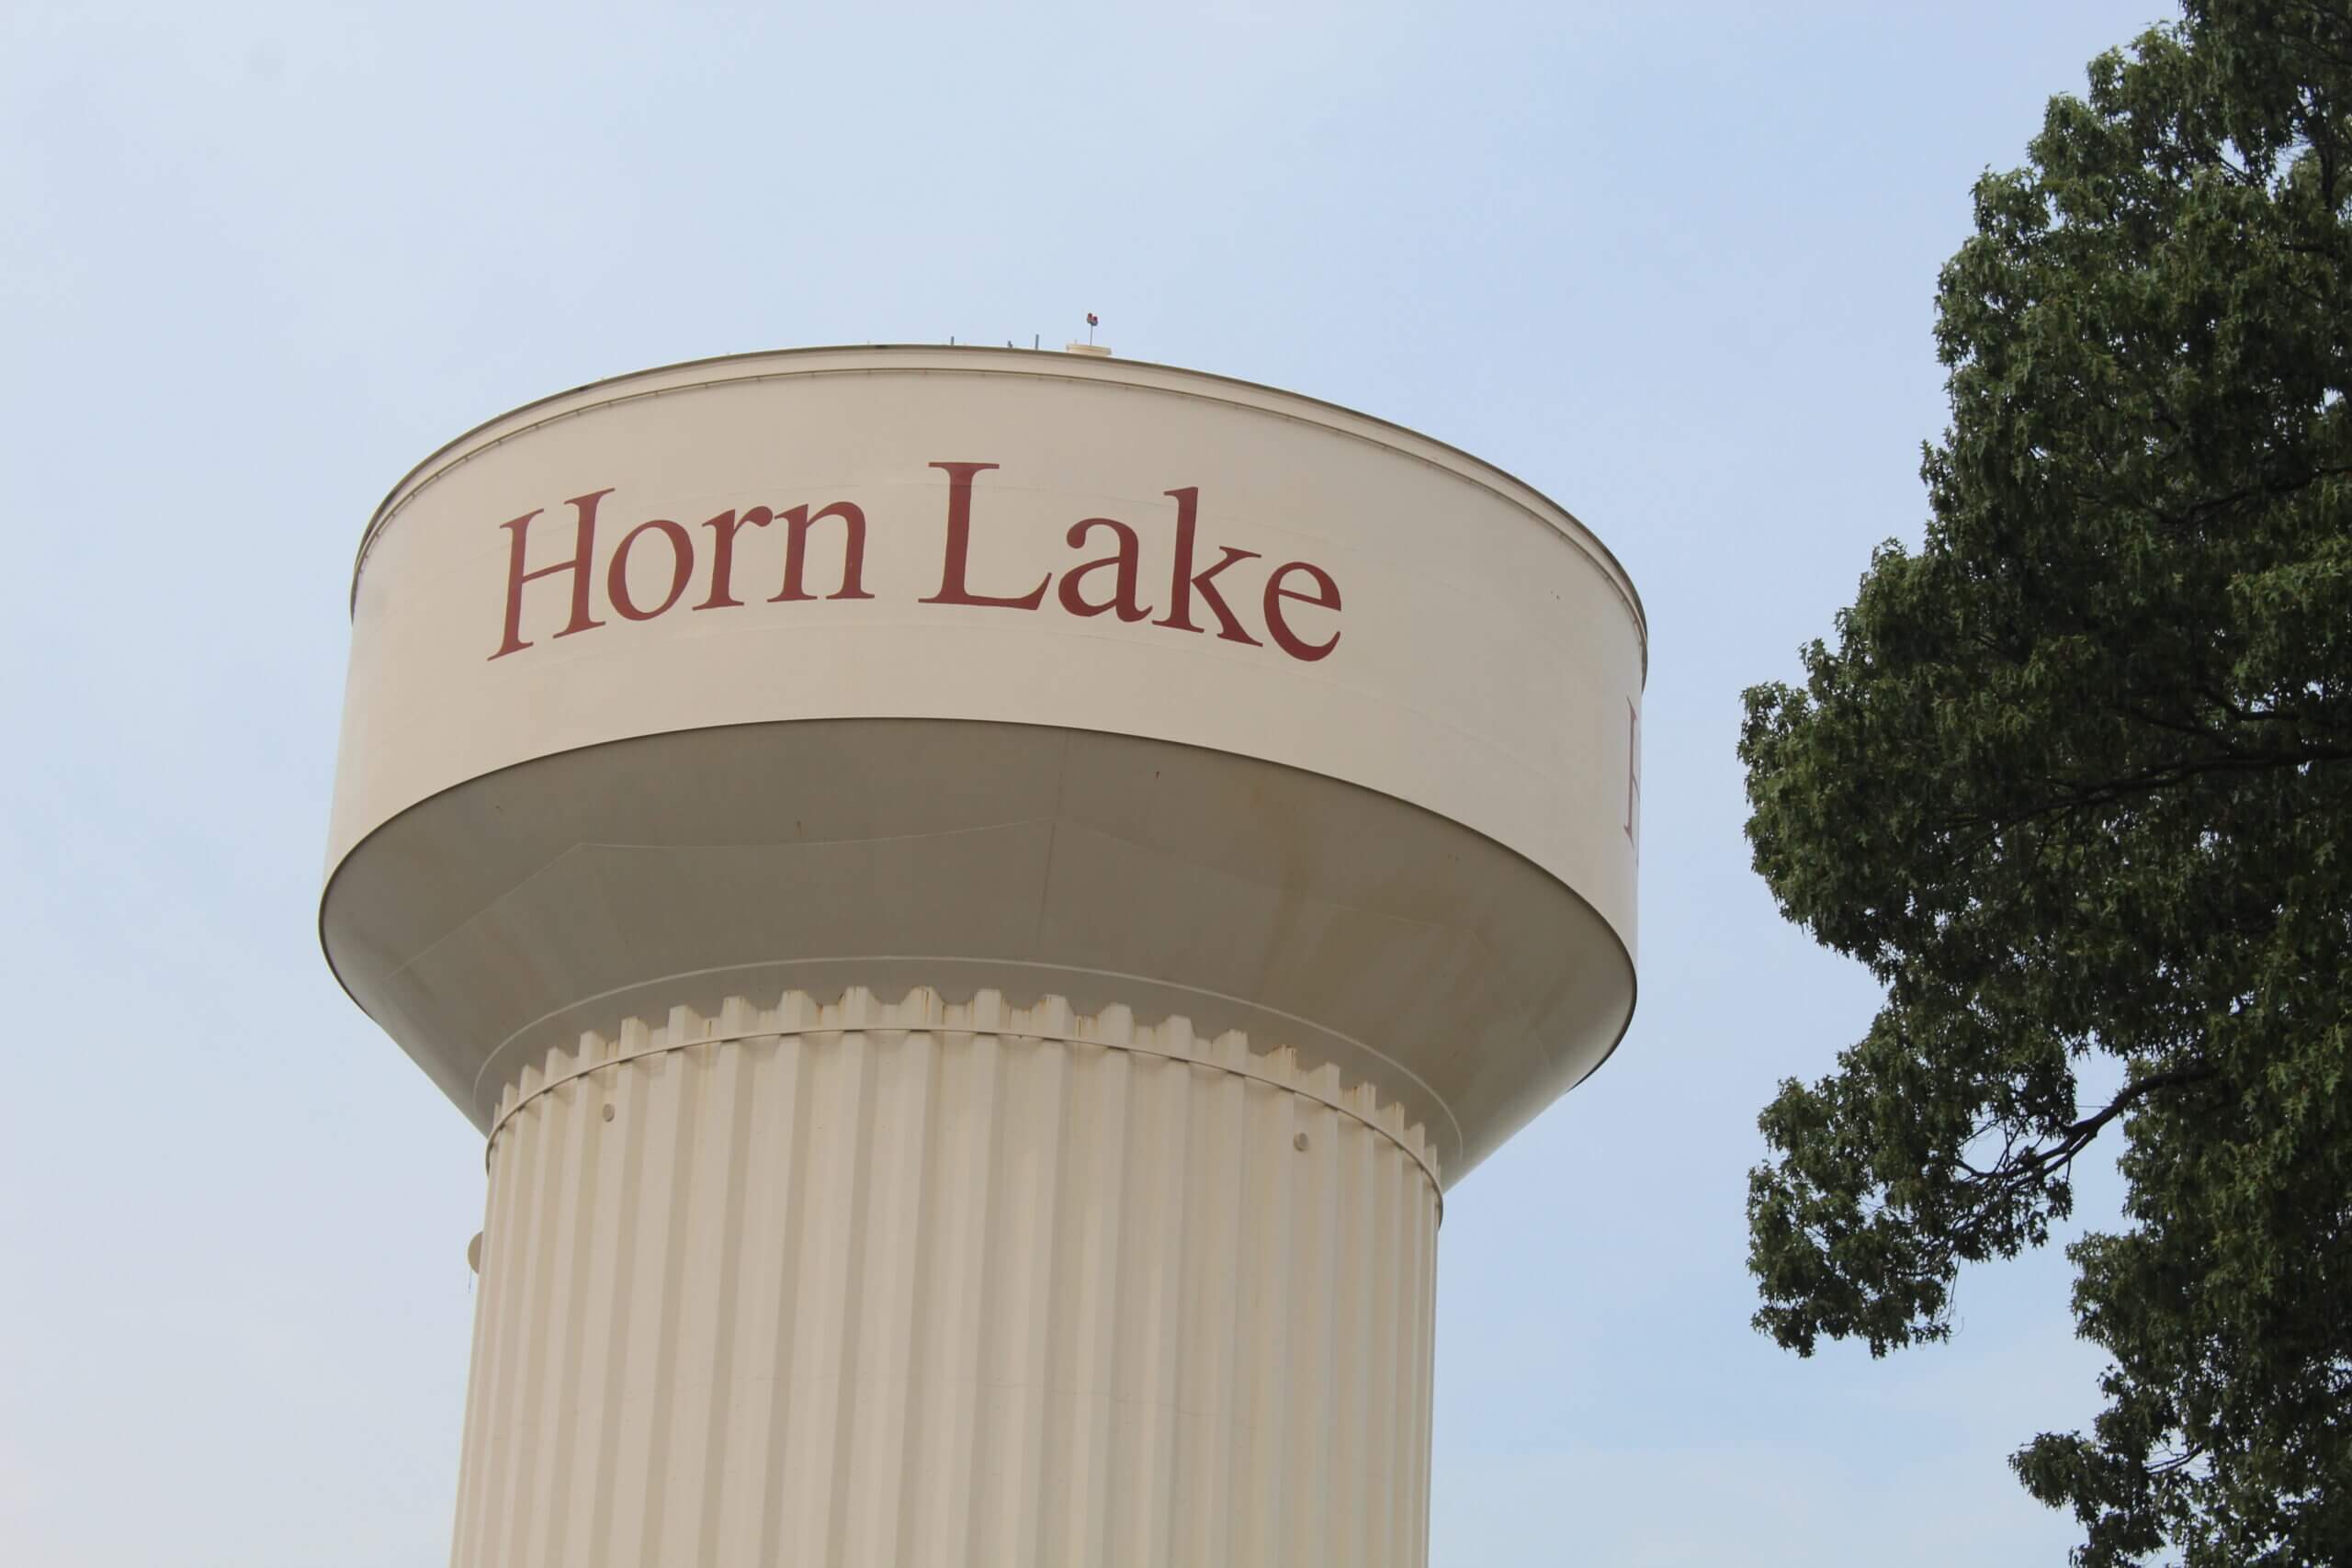 Fireworks issue continues in Horn Lake, board previews